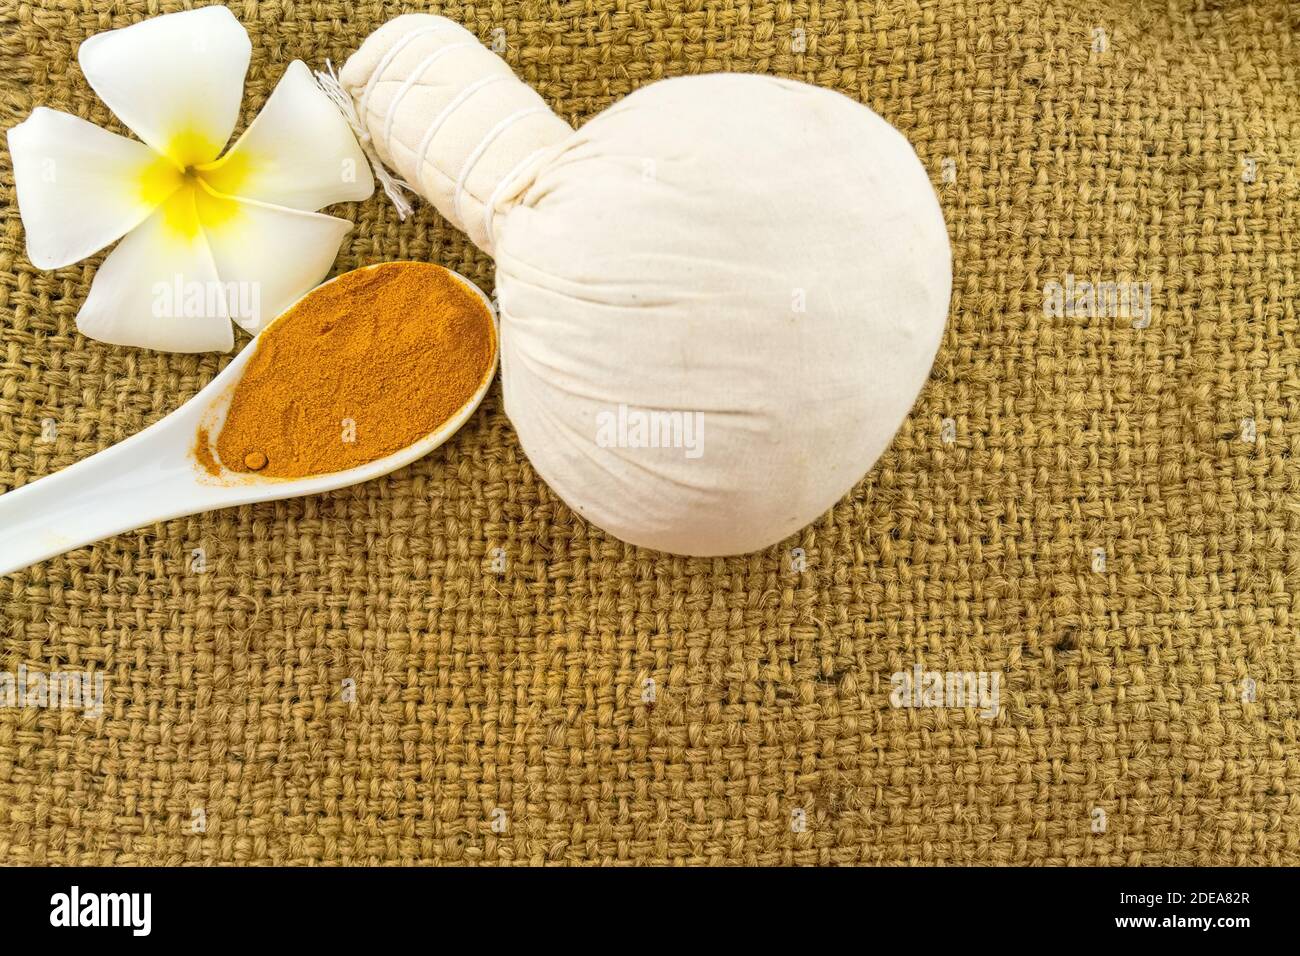 Spa herbal compressing ball , white frangipani flowers (Plumeria spp , Apocynaceae, Pagoda tree, Temple tree) and turmeric powder in wooden spoon on b Stock Photo